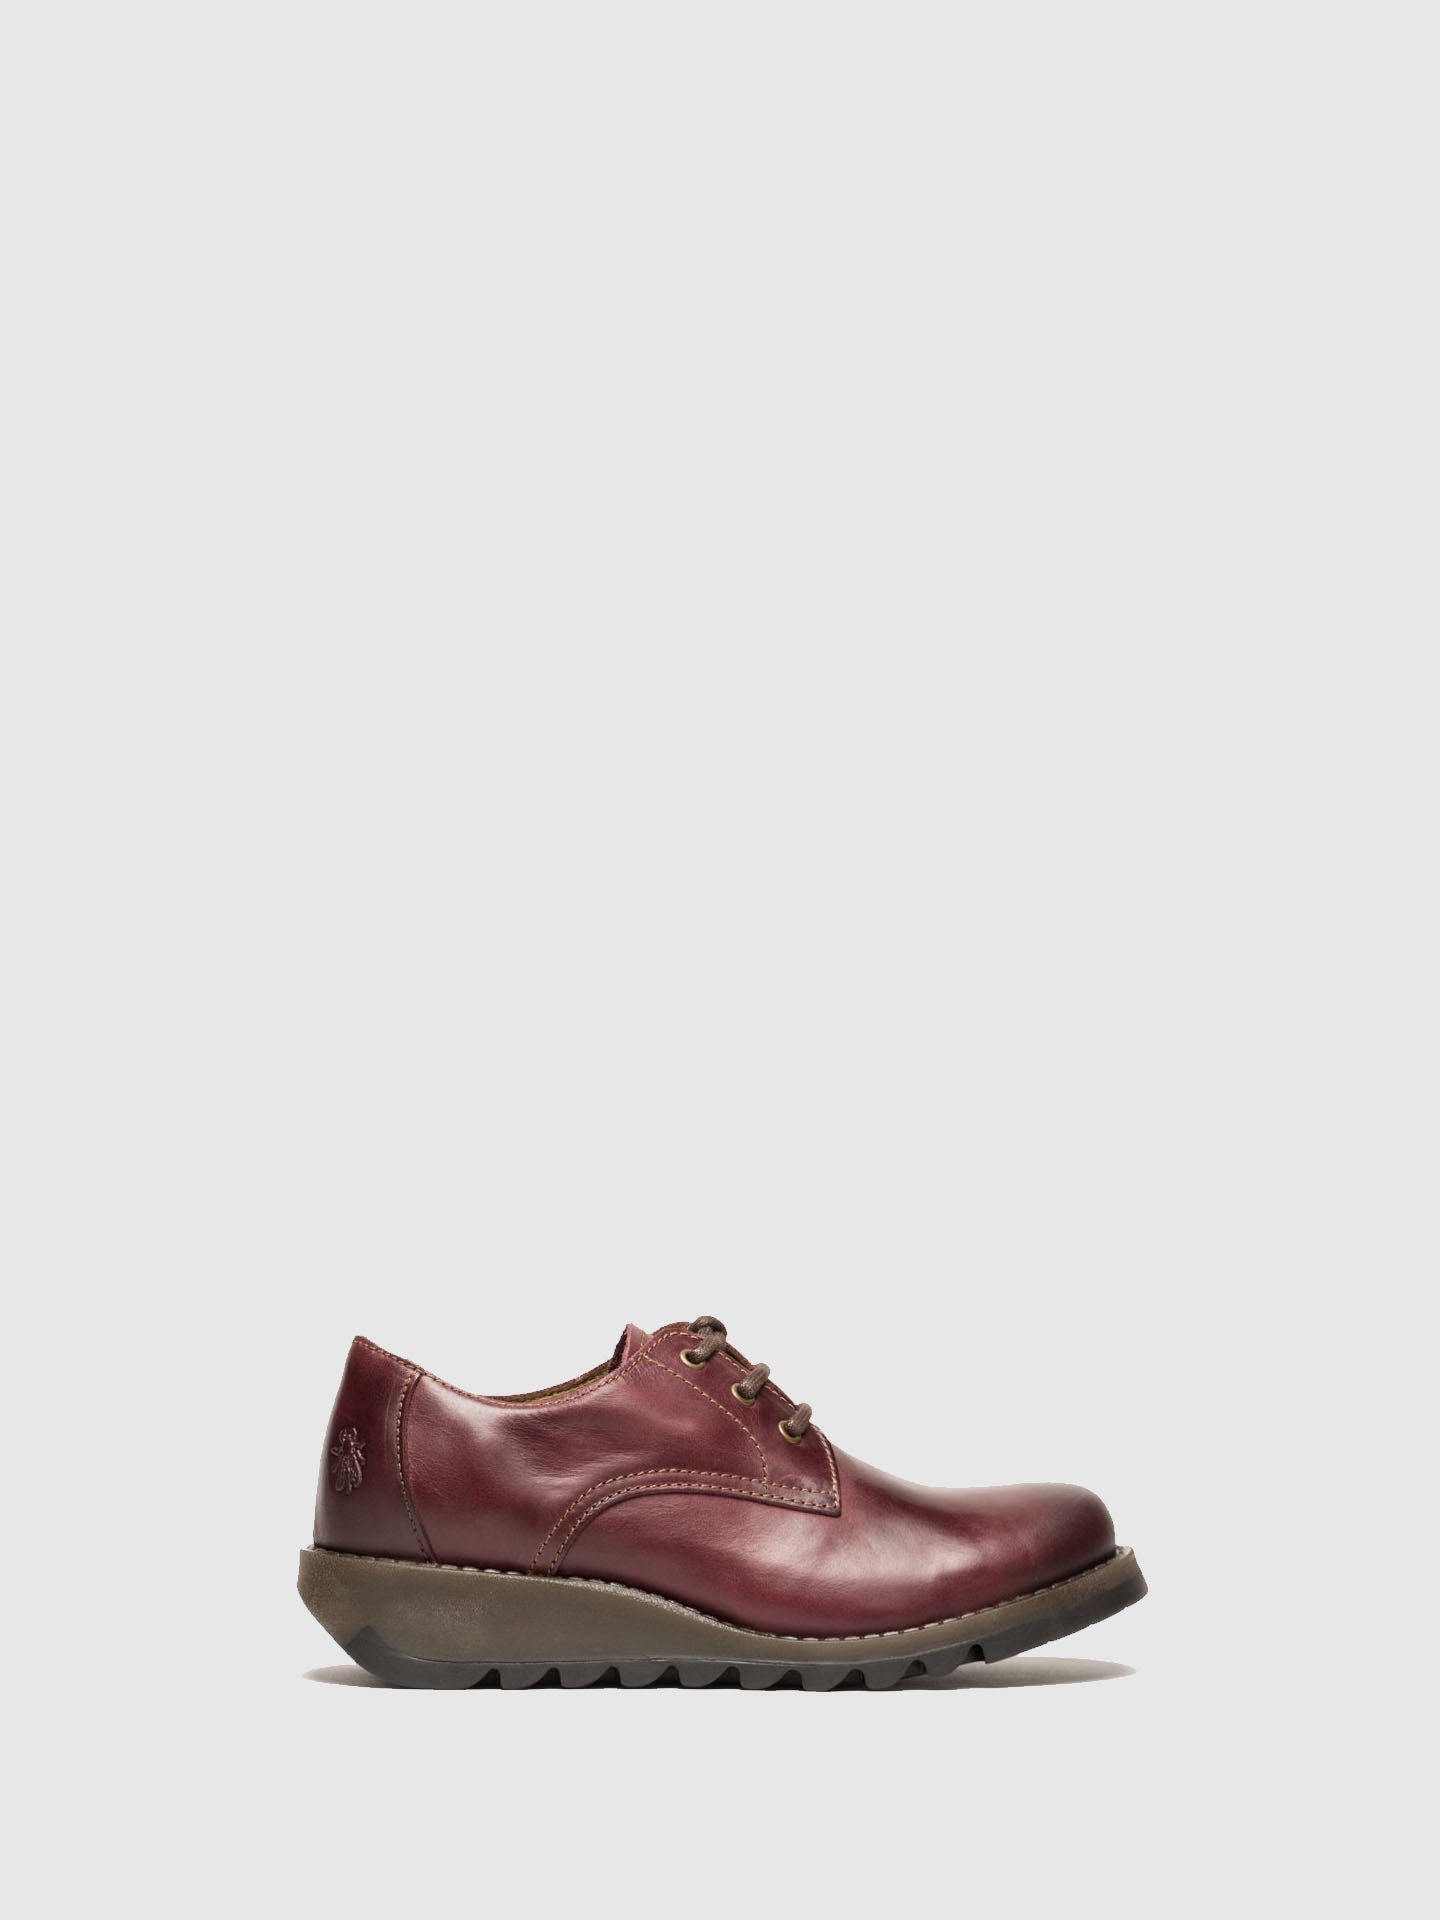 Fly London DarkRed Derby Shoes